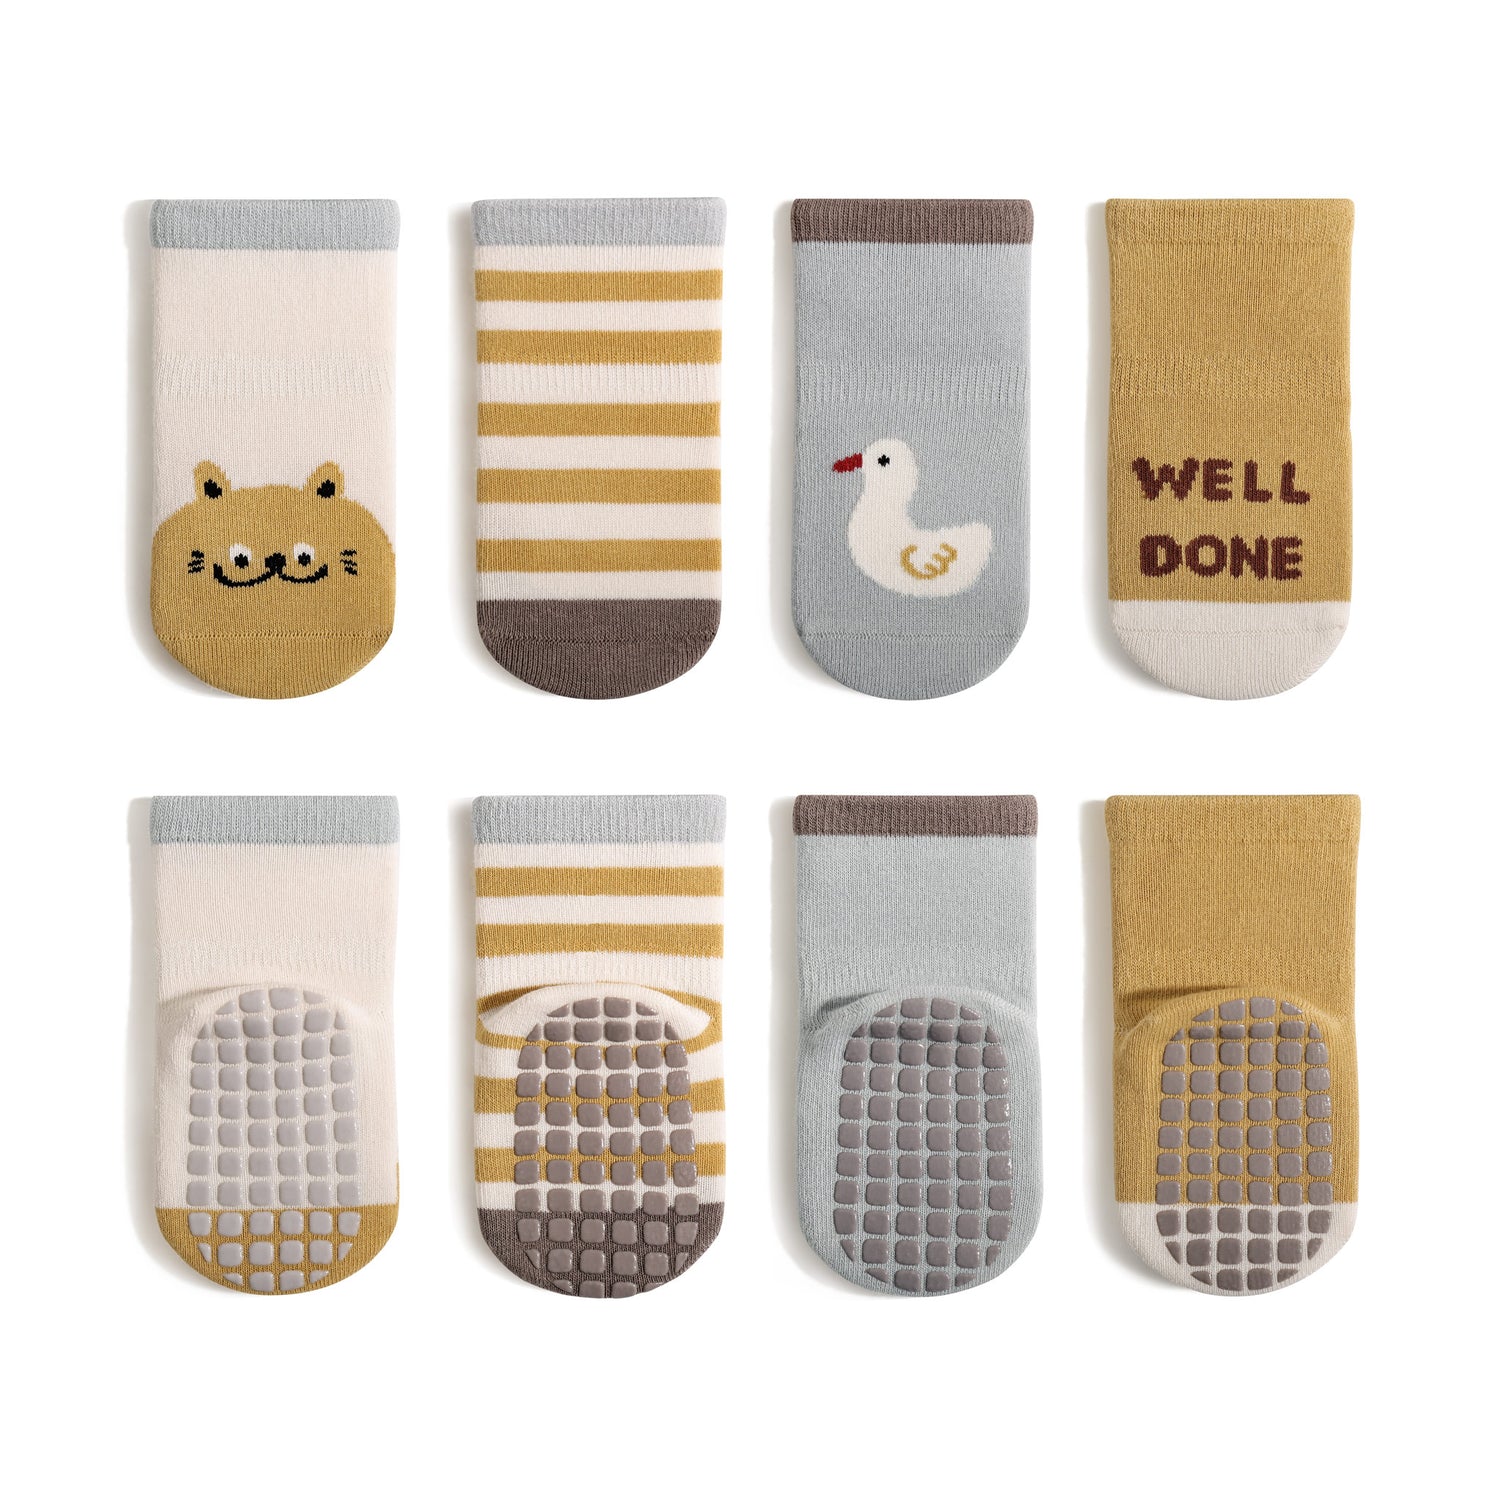 Eco-friendly toddler grip socks made from organic materials